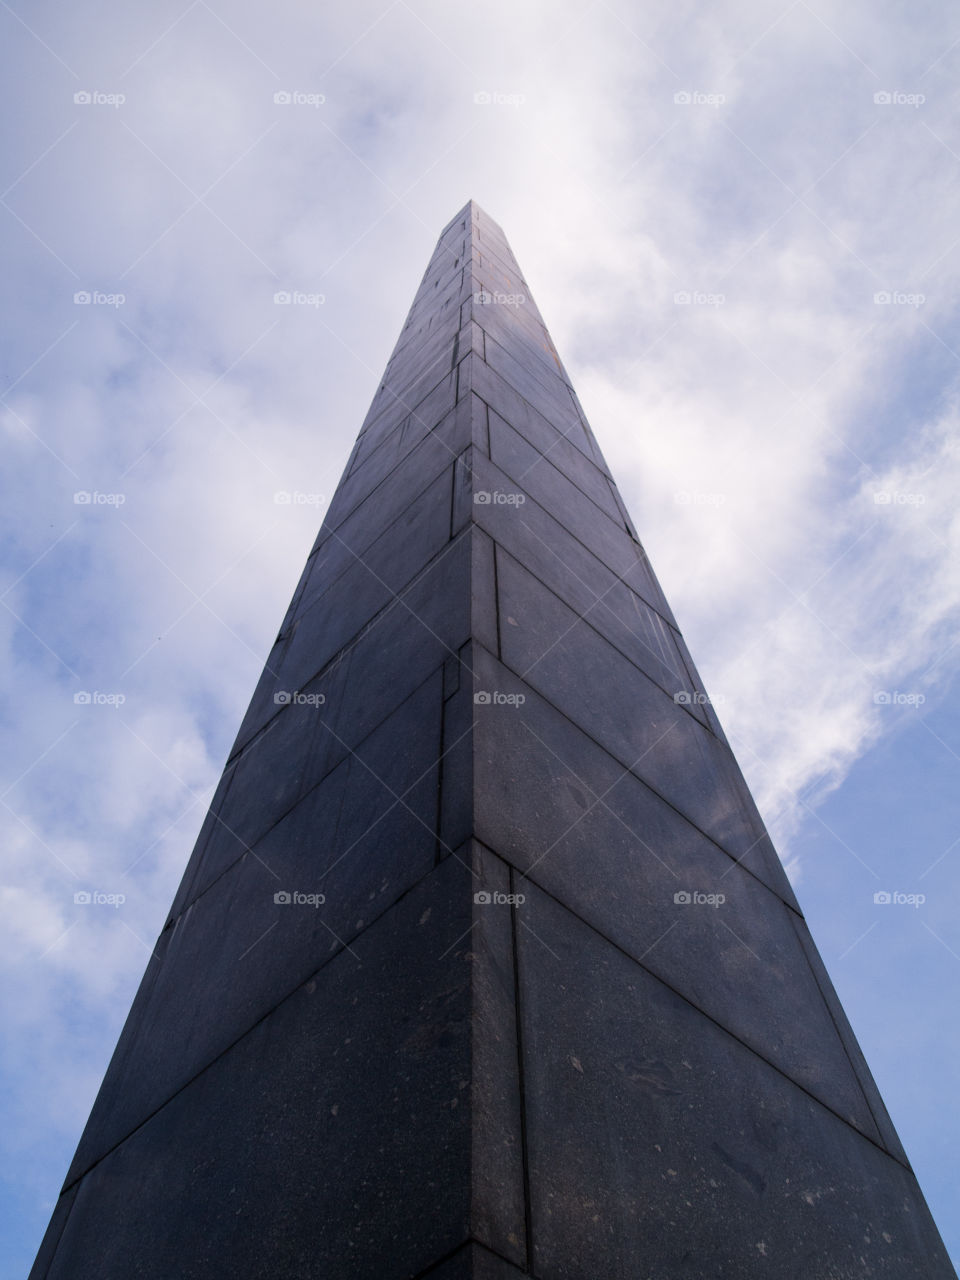 gray concrete cone-shaped monument under a blue sky with white clouds 2